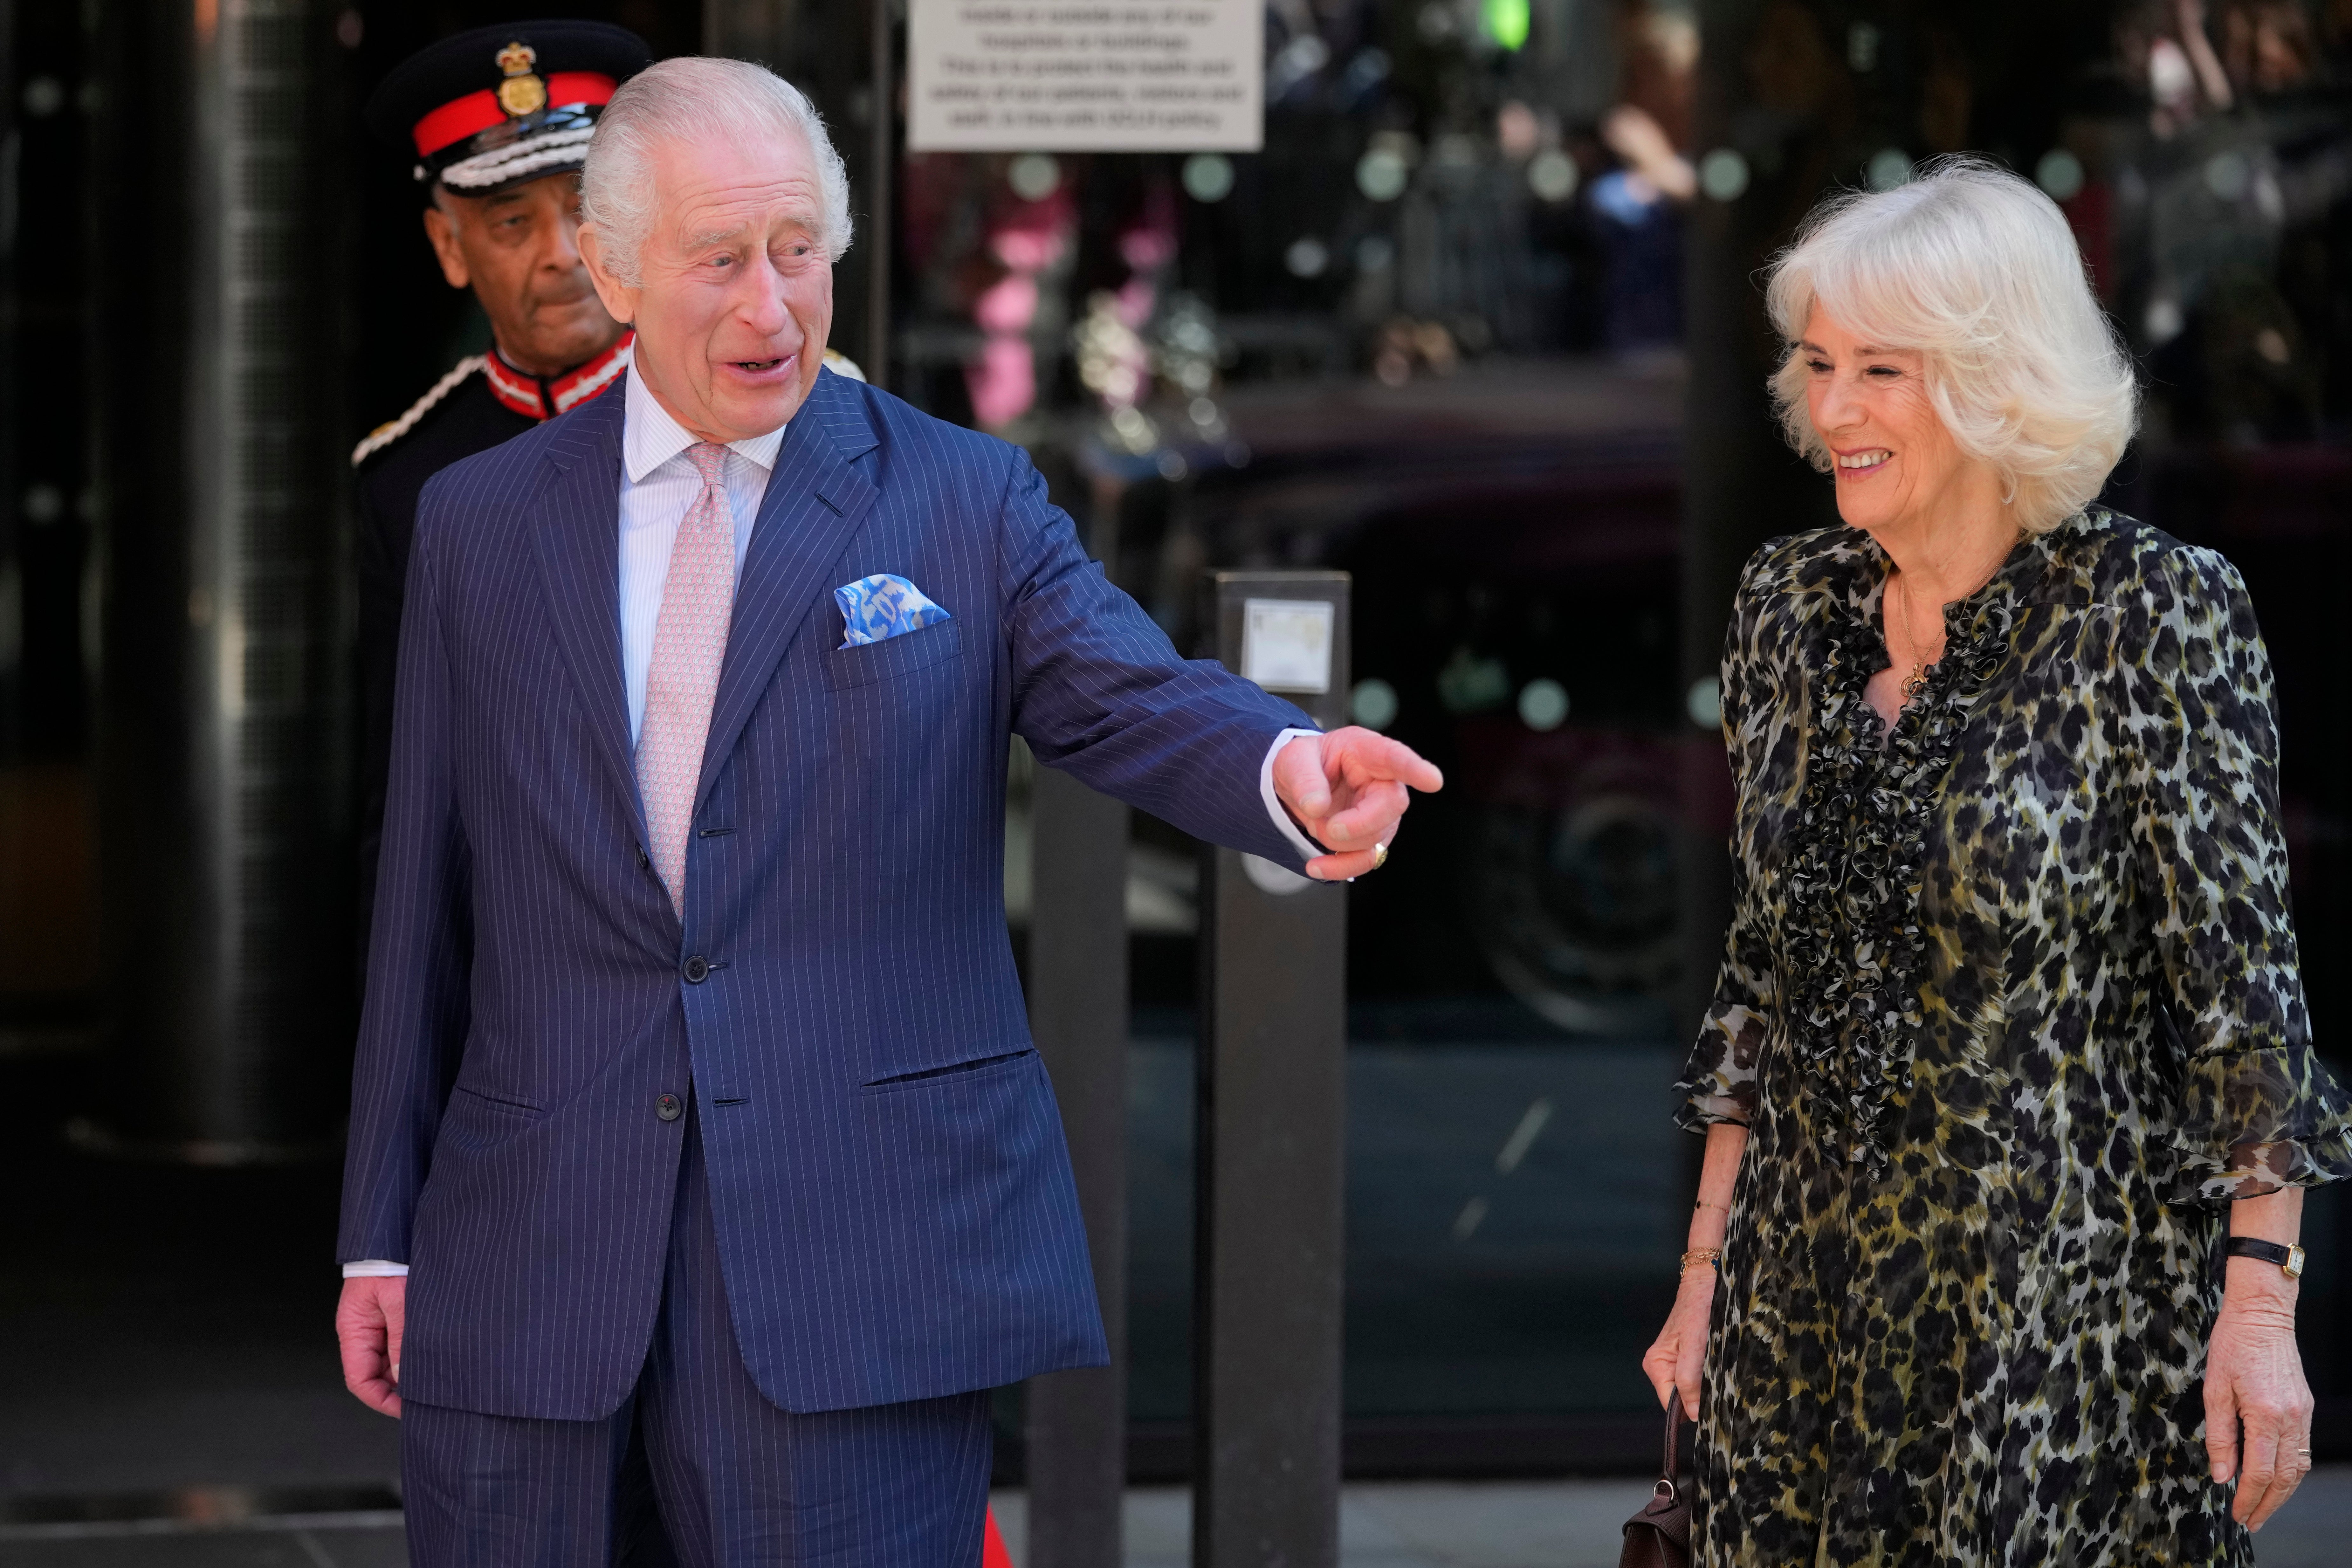 It was all smiles from Charles and Camilla as he returned to work